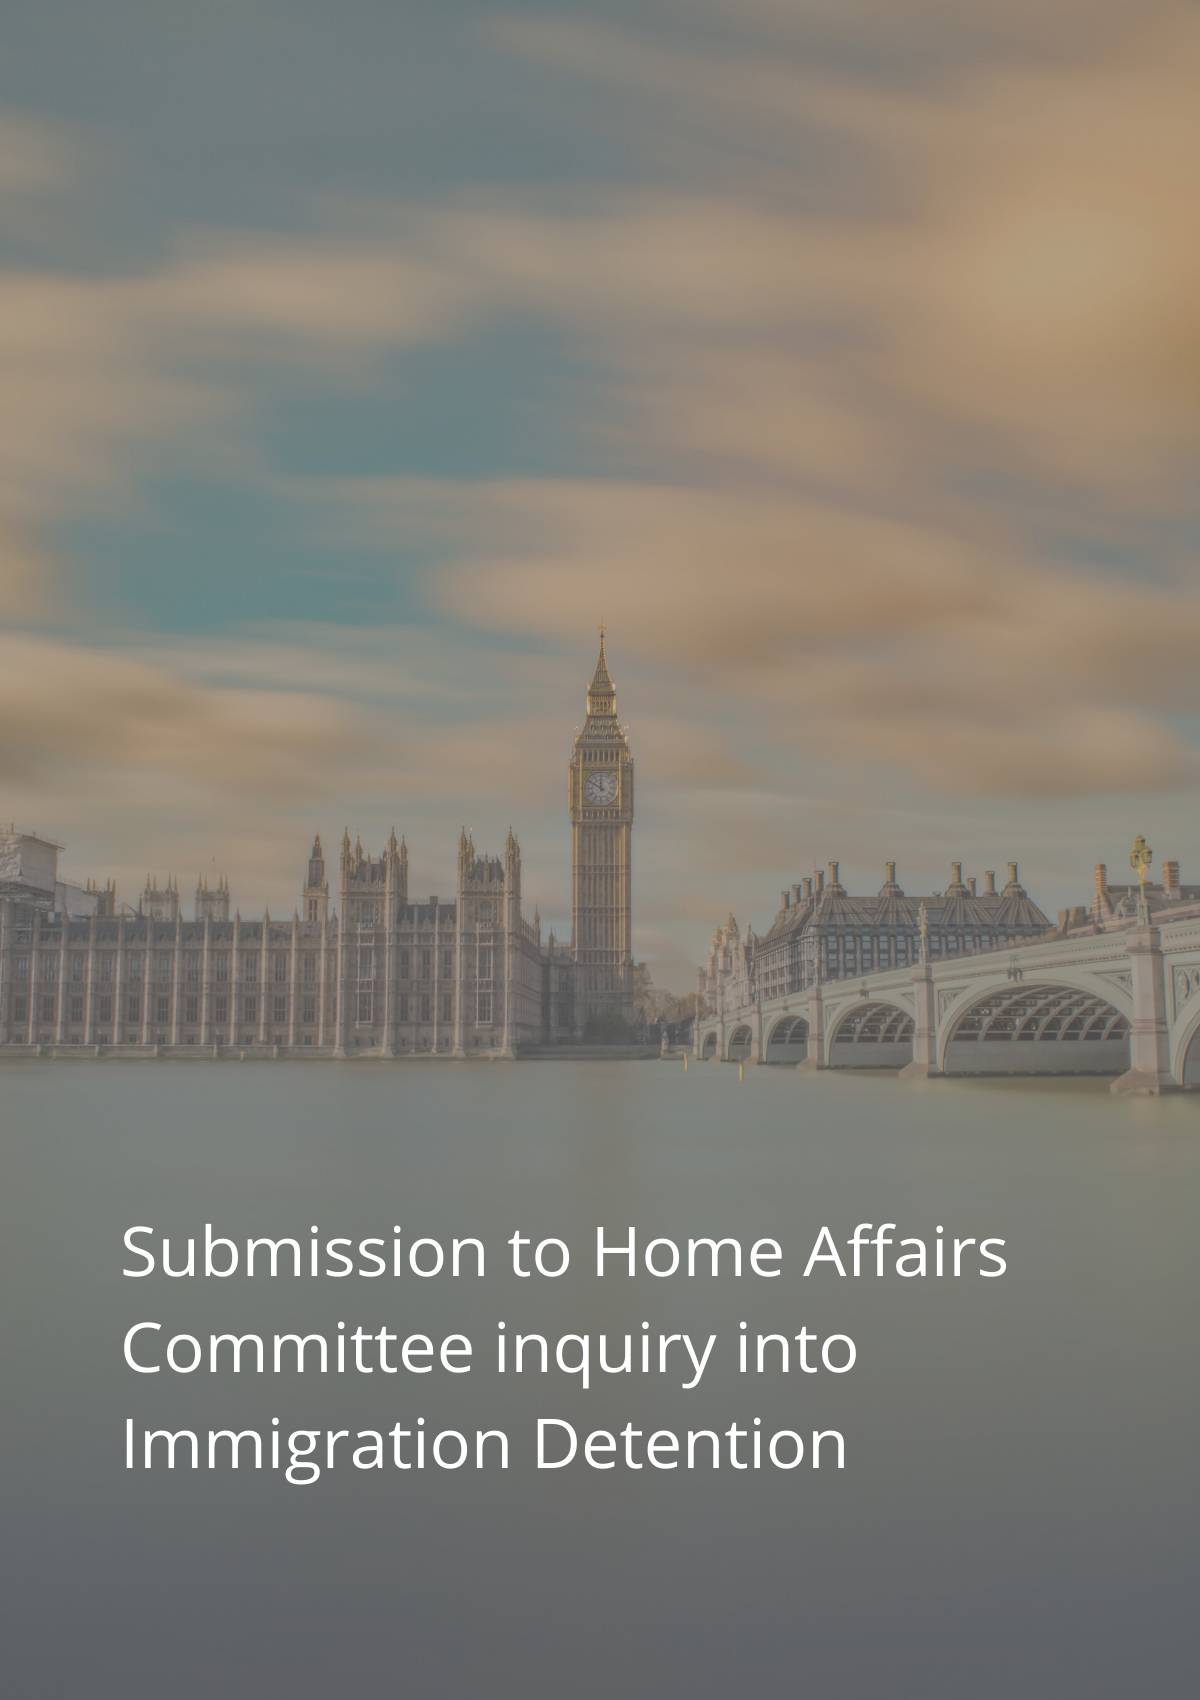 Submission to home affairs committee inquiry into immigration detention.